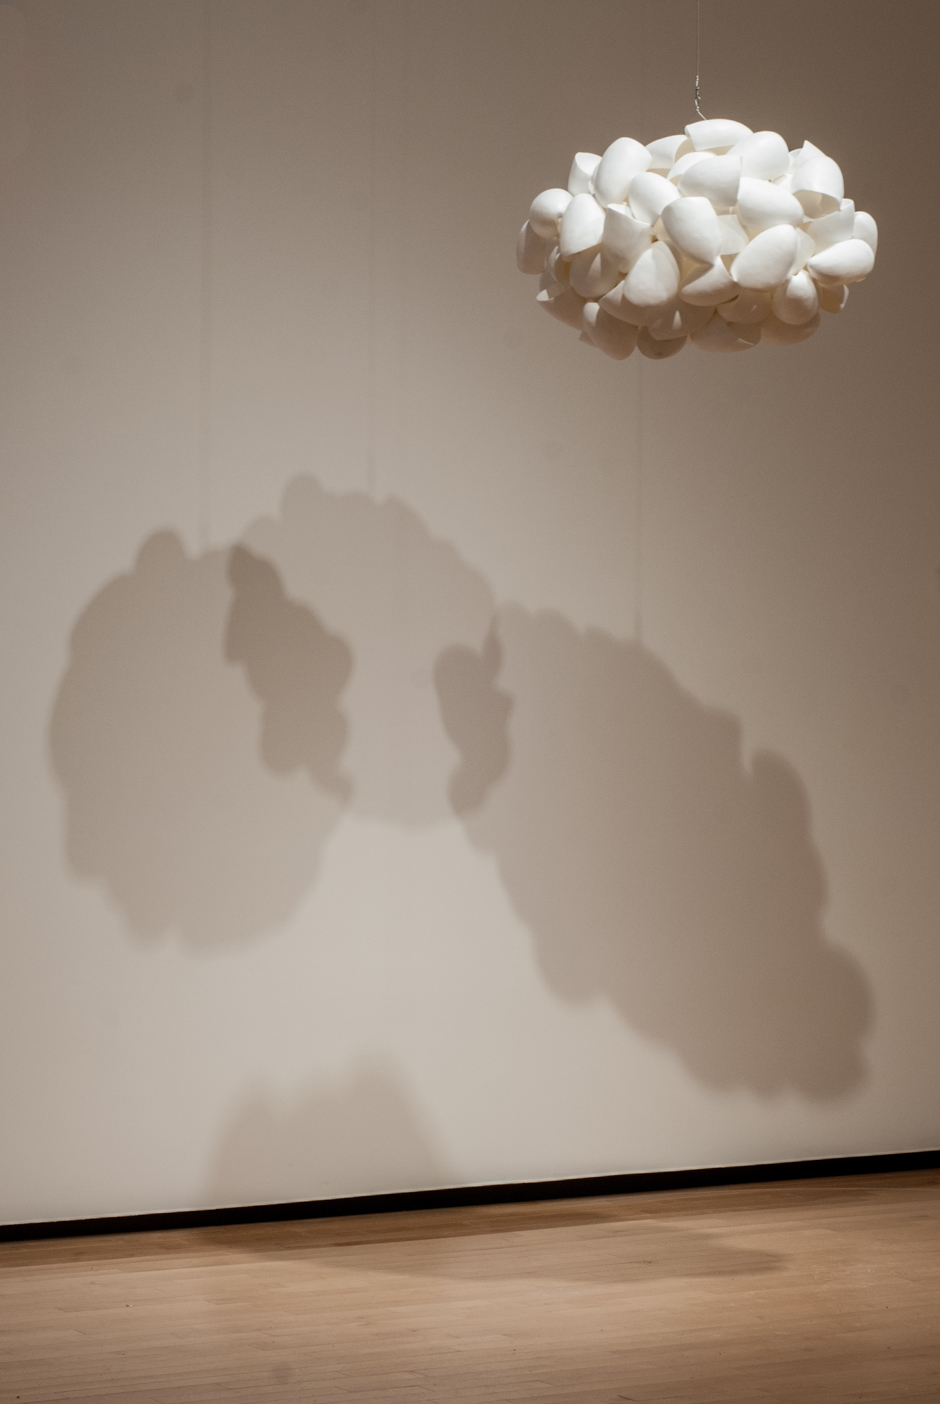 Image of suspended "Cloud" sculpture created from cast urethane and stainless steel